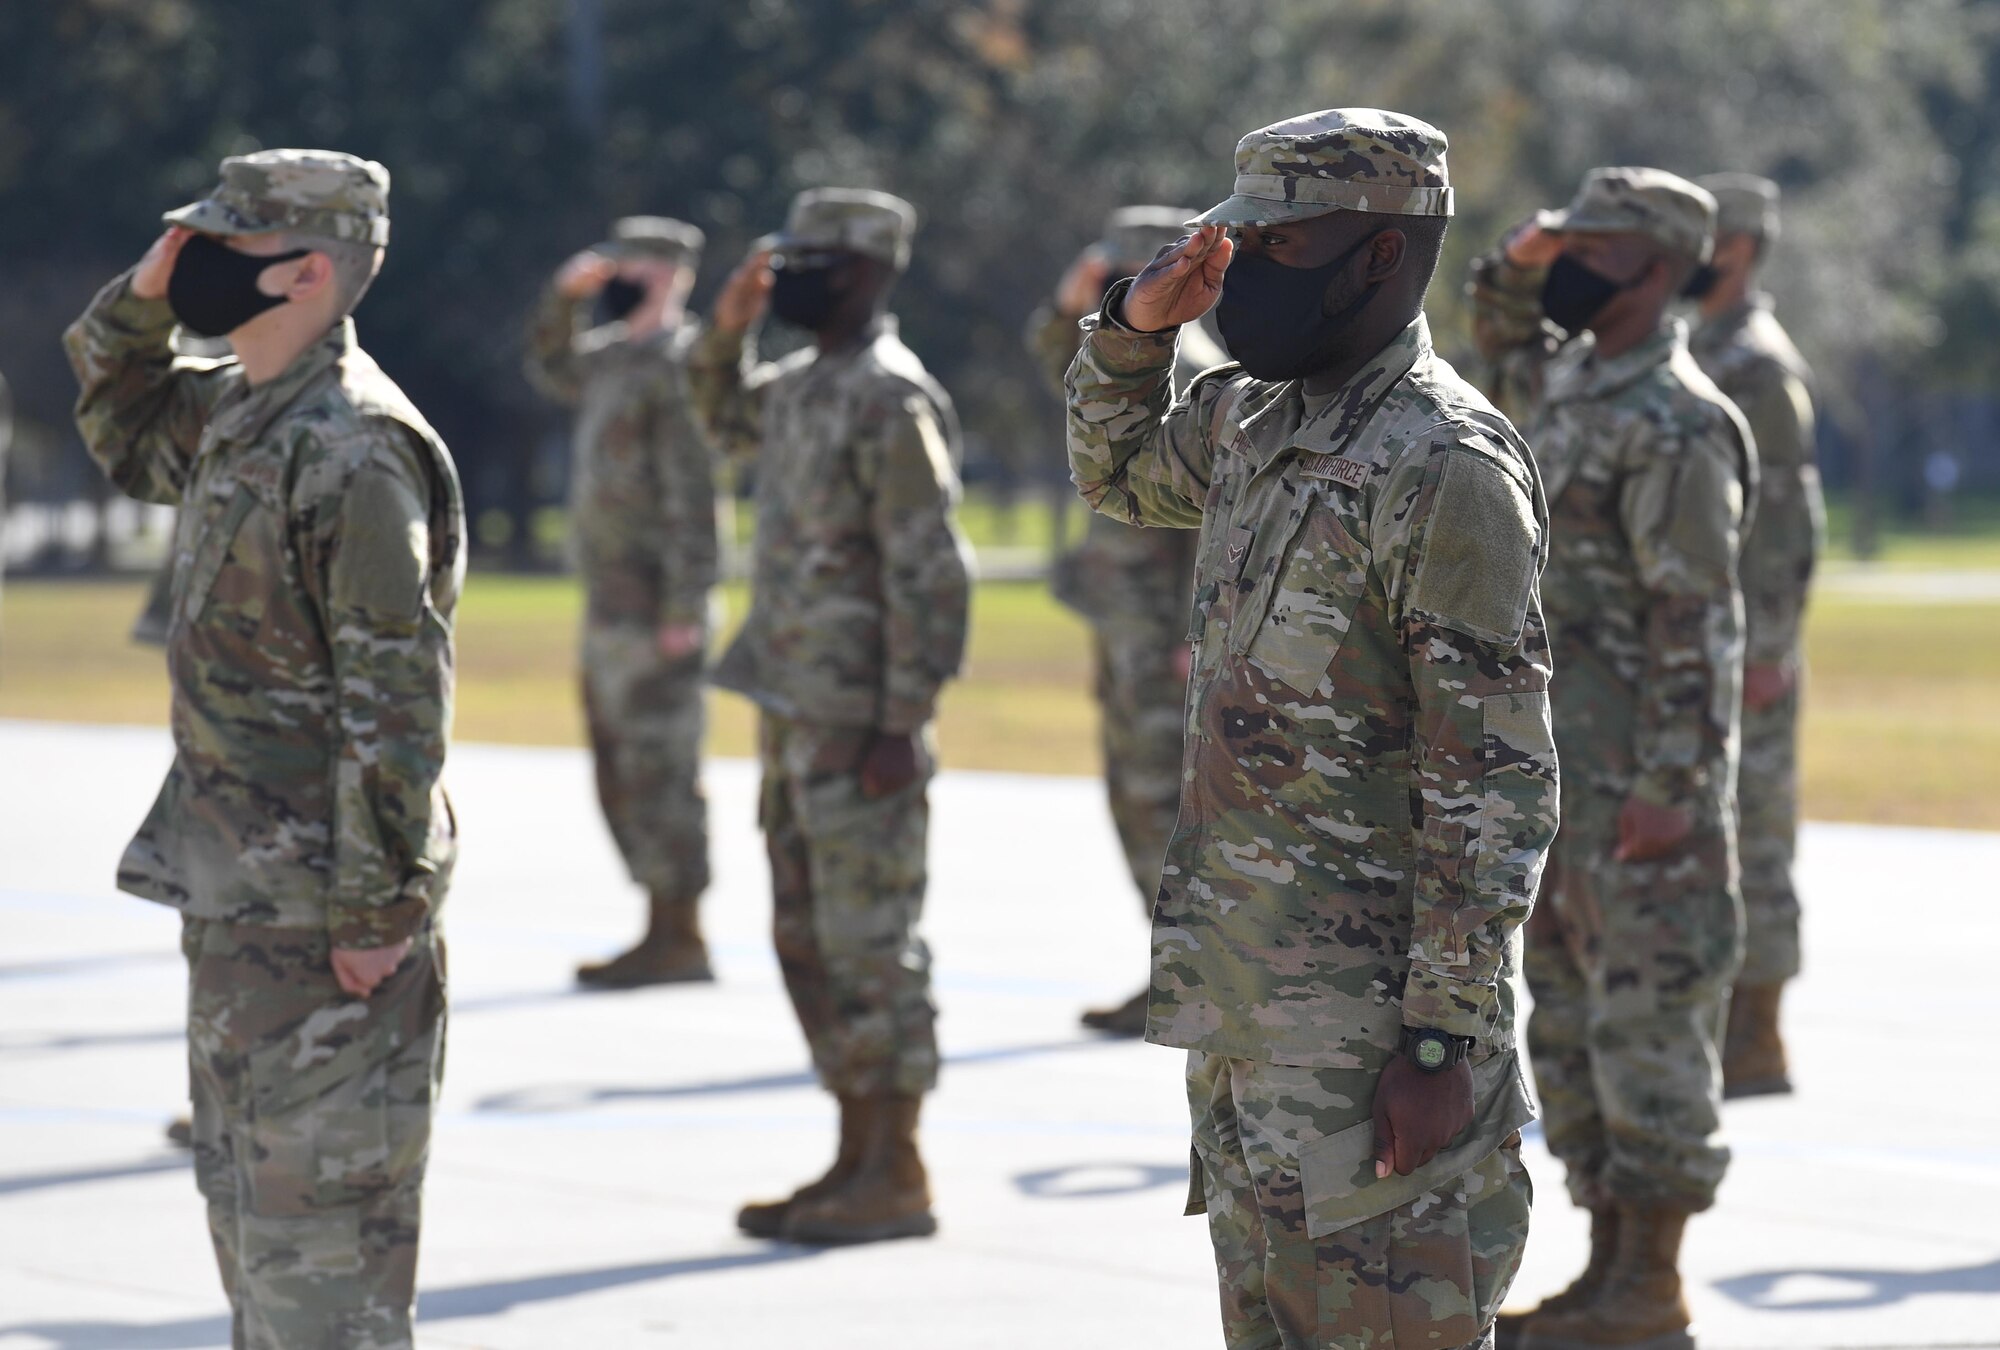 Graduating basic military training trainees render a salute during the final BMT graduation ceremony on the Levitow Training Support Facility drill pad at Keesler Air Force Base, Mississippi, Nov. 6, 2020. Nearly 60 trainees from the 37th Training Wing Detachment 5 completed the six-week BMT course. Throughout the duration of BMT training at Keesler, 18 flights and 939 Airmen graduated. (U.S. Air Force photo by Kemberly Groue)